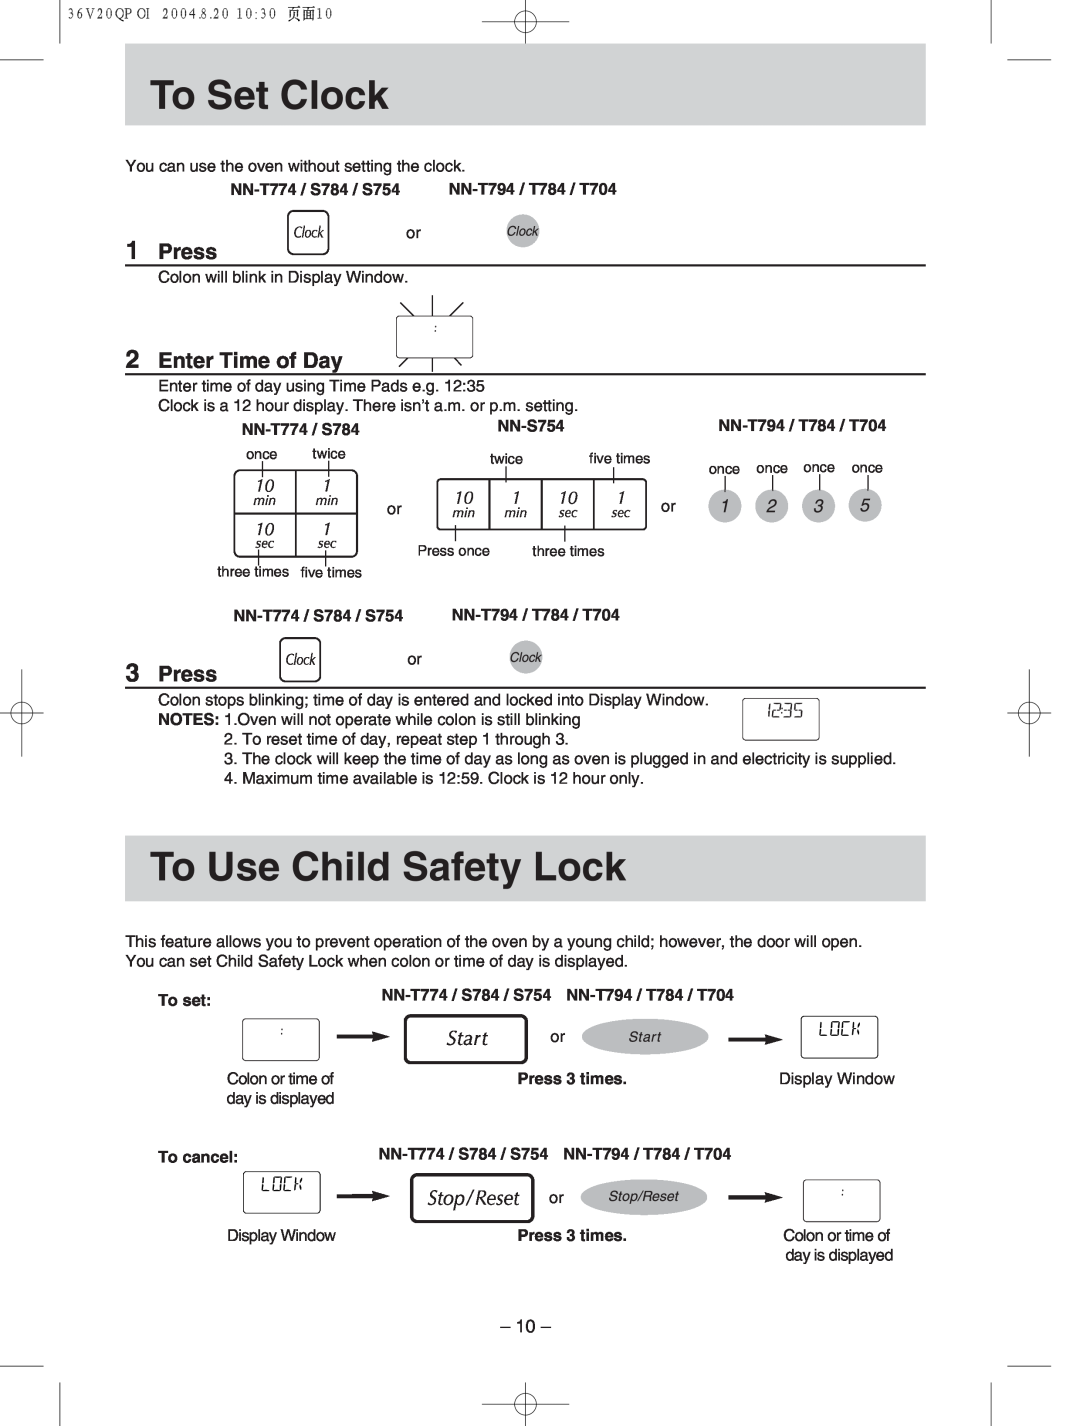 Panasonic NN-T704, NN-S784 manual h To Set Clock, To Use Child Safety Lock, Press, Enter Time of Day 